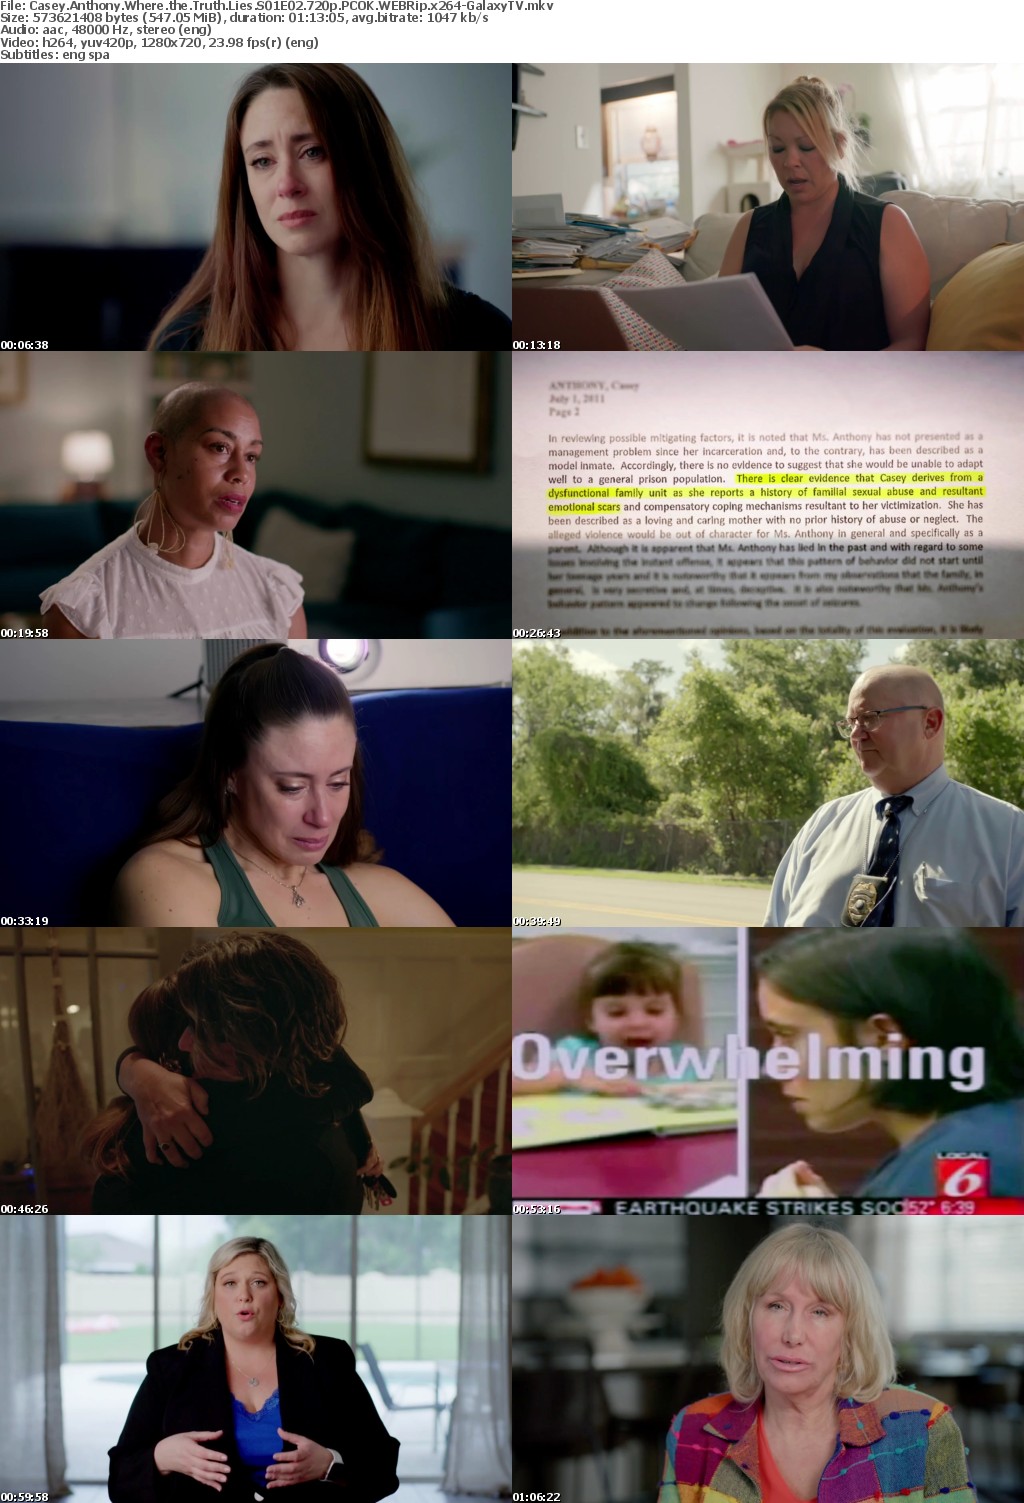 Casey Anthony Where the Truth Lies S01 COMPLETE 720p PCOK WEBRip x264-GalaxyTV